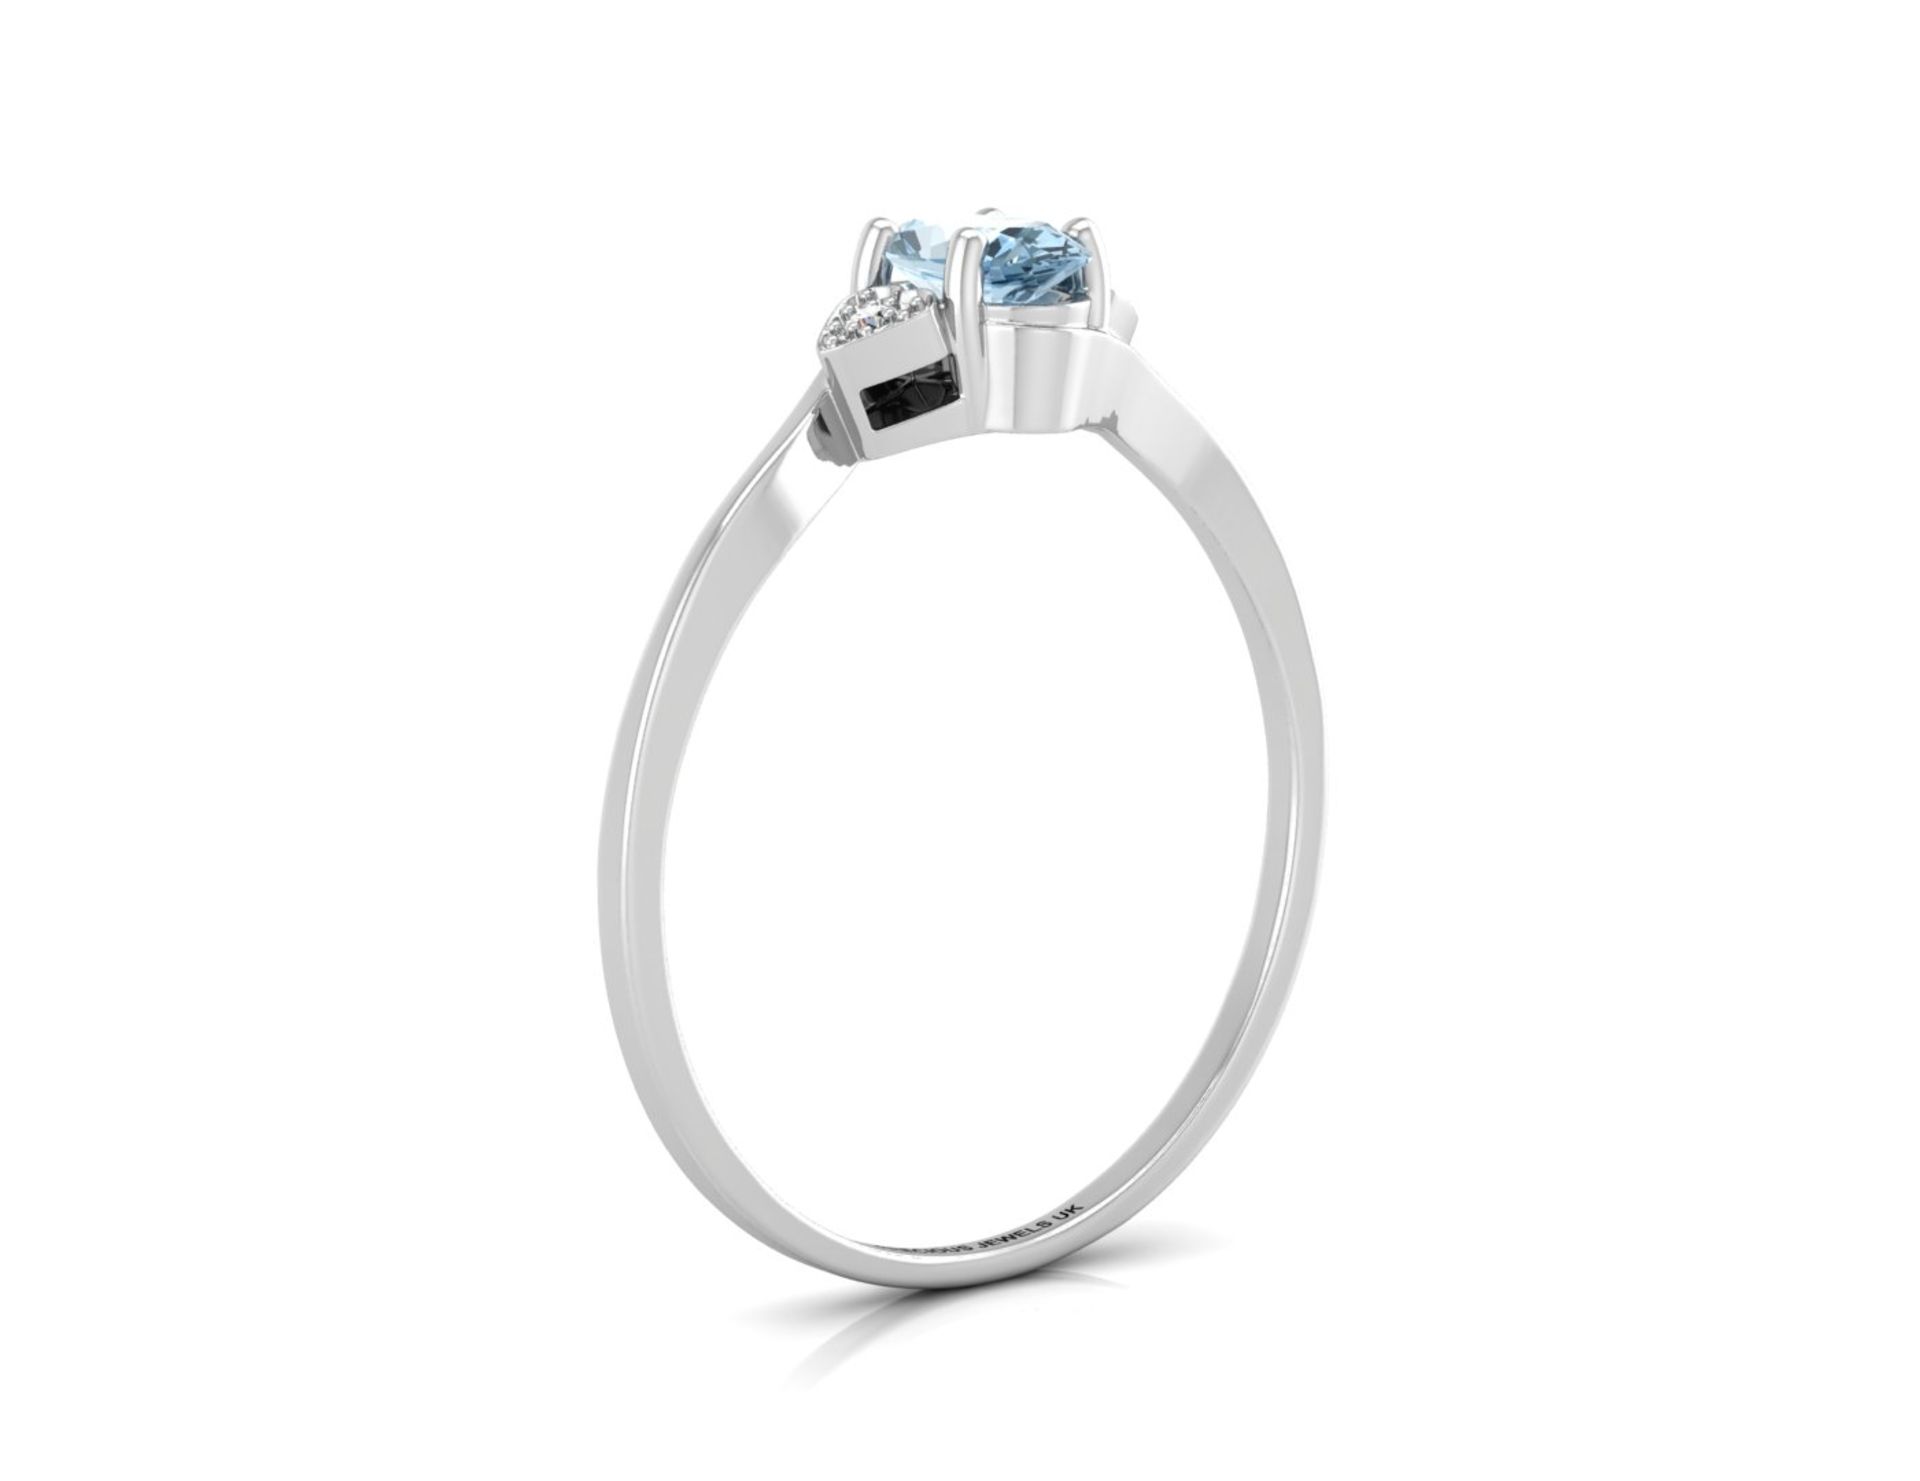 9ct White Gold Fancy Cluster Diamond Blue Topaz Ring 0.01 Carats - Image 2 of 5